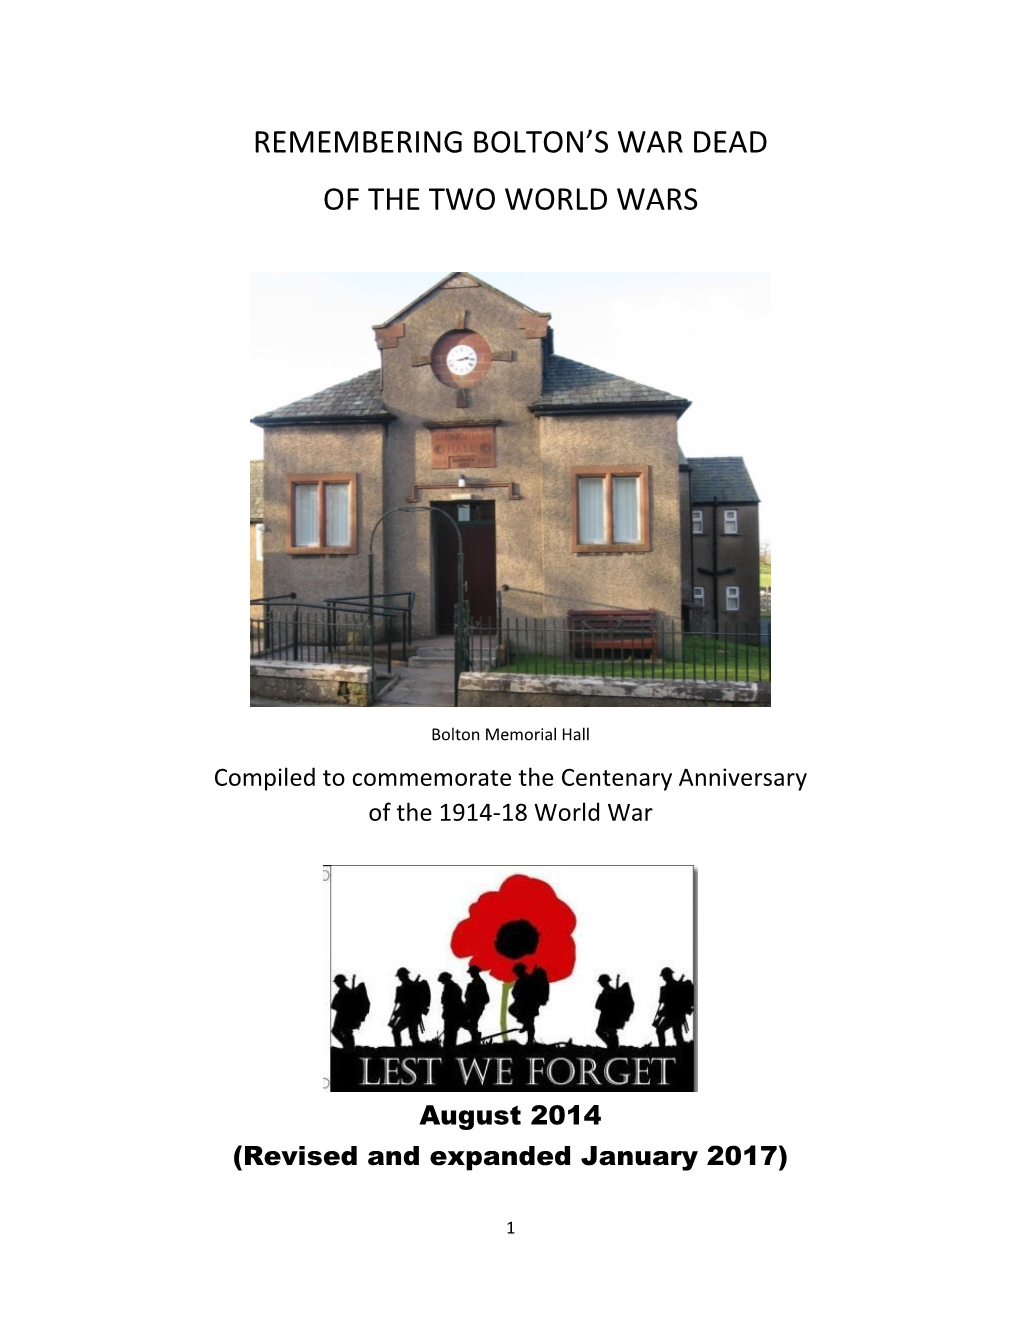 Remembering Bolton's War Dead of the Two World Wars